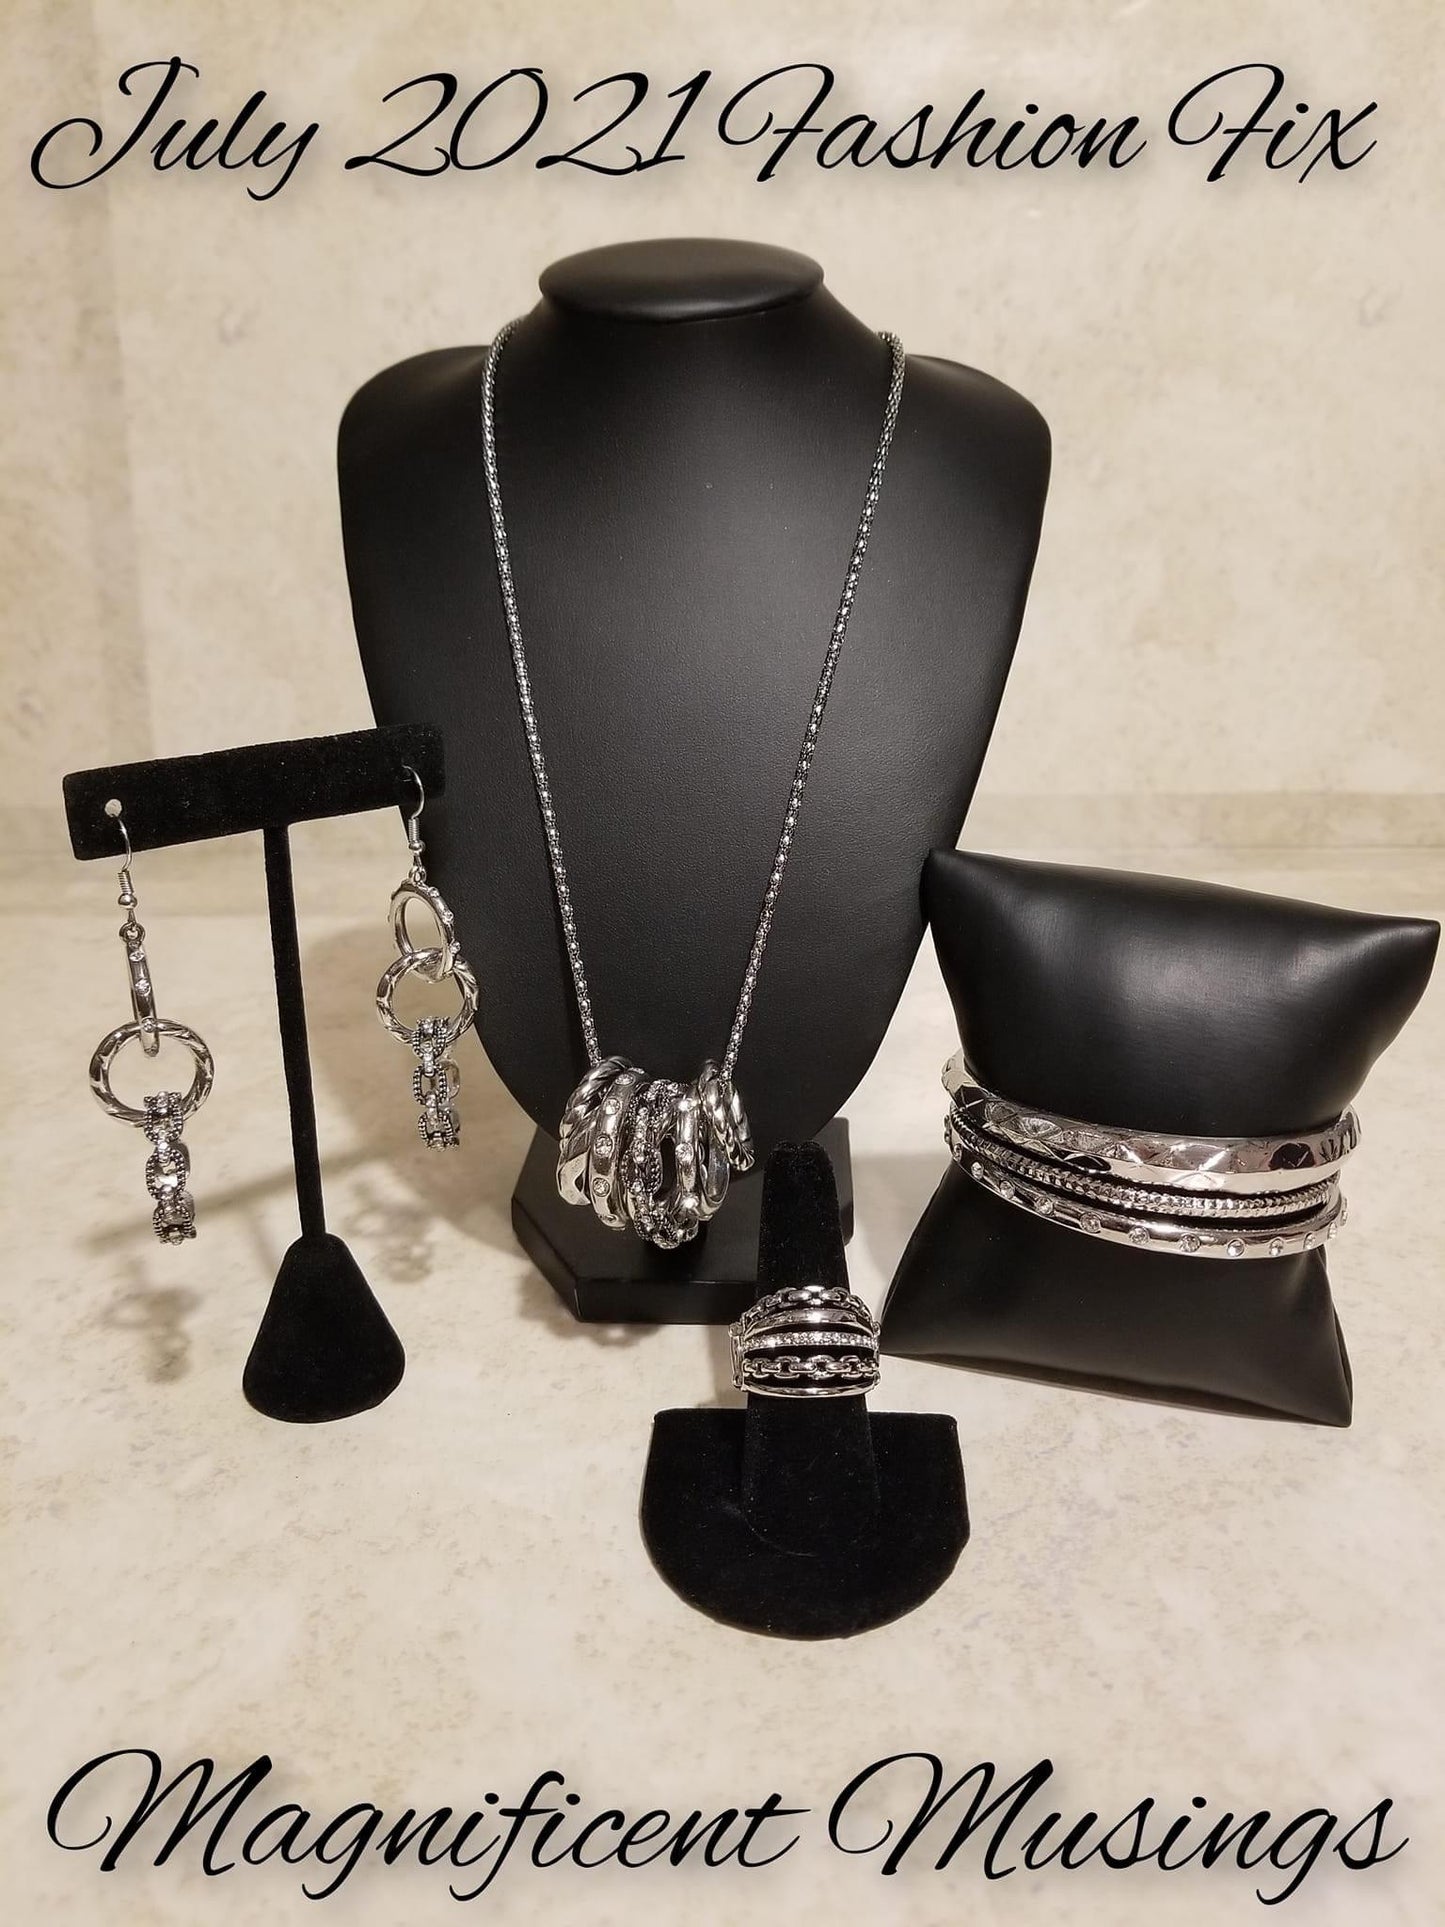 Paparazzi Accessories Magnificent Musings: FF July 2021 The Magnificent Mile in Chicago is where we pulled our inspiration for the Magnificent Musings collection. With a range of shopping venues, the Magnificent Mile is a hub for classic trends with urban